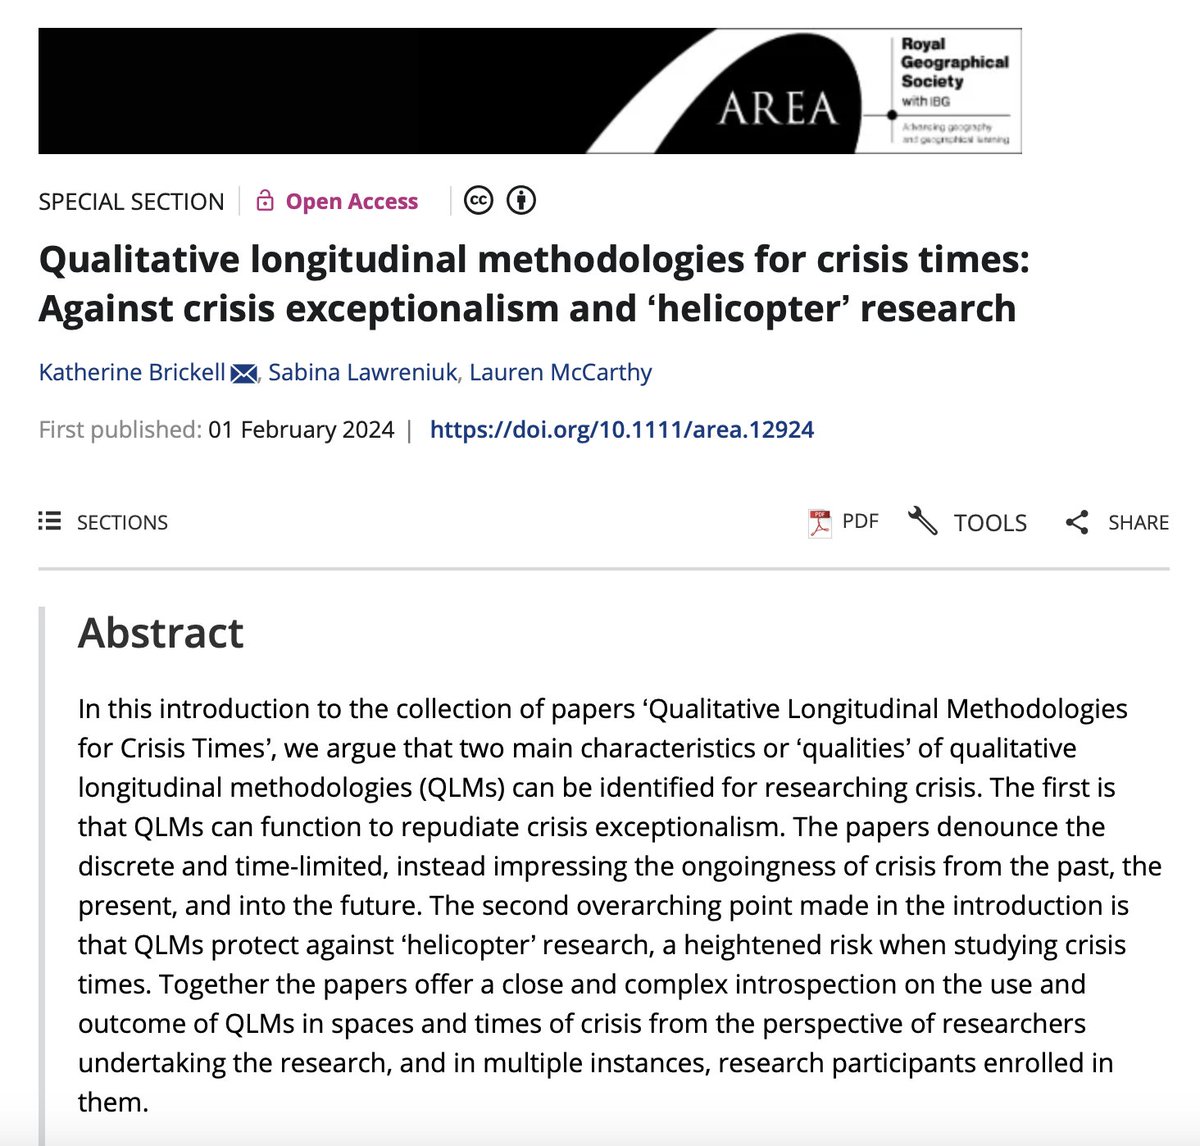 Qualitative longitudinal methodologies - why do they matter for researching crisis times? We've had a go at answering this❓through our new intro to forthcoming special section in @RGS_IBGhe Area journal #methods #qualitative #longitudinal #crisis 🔗rgs-ibg.onlinelibrary.wiley.com/doi/full/10.11…